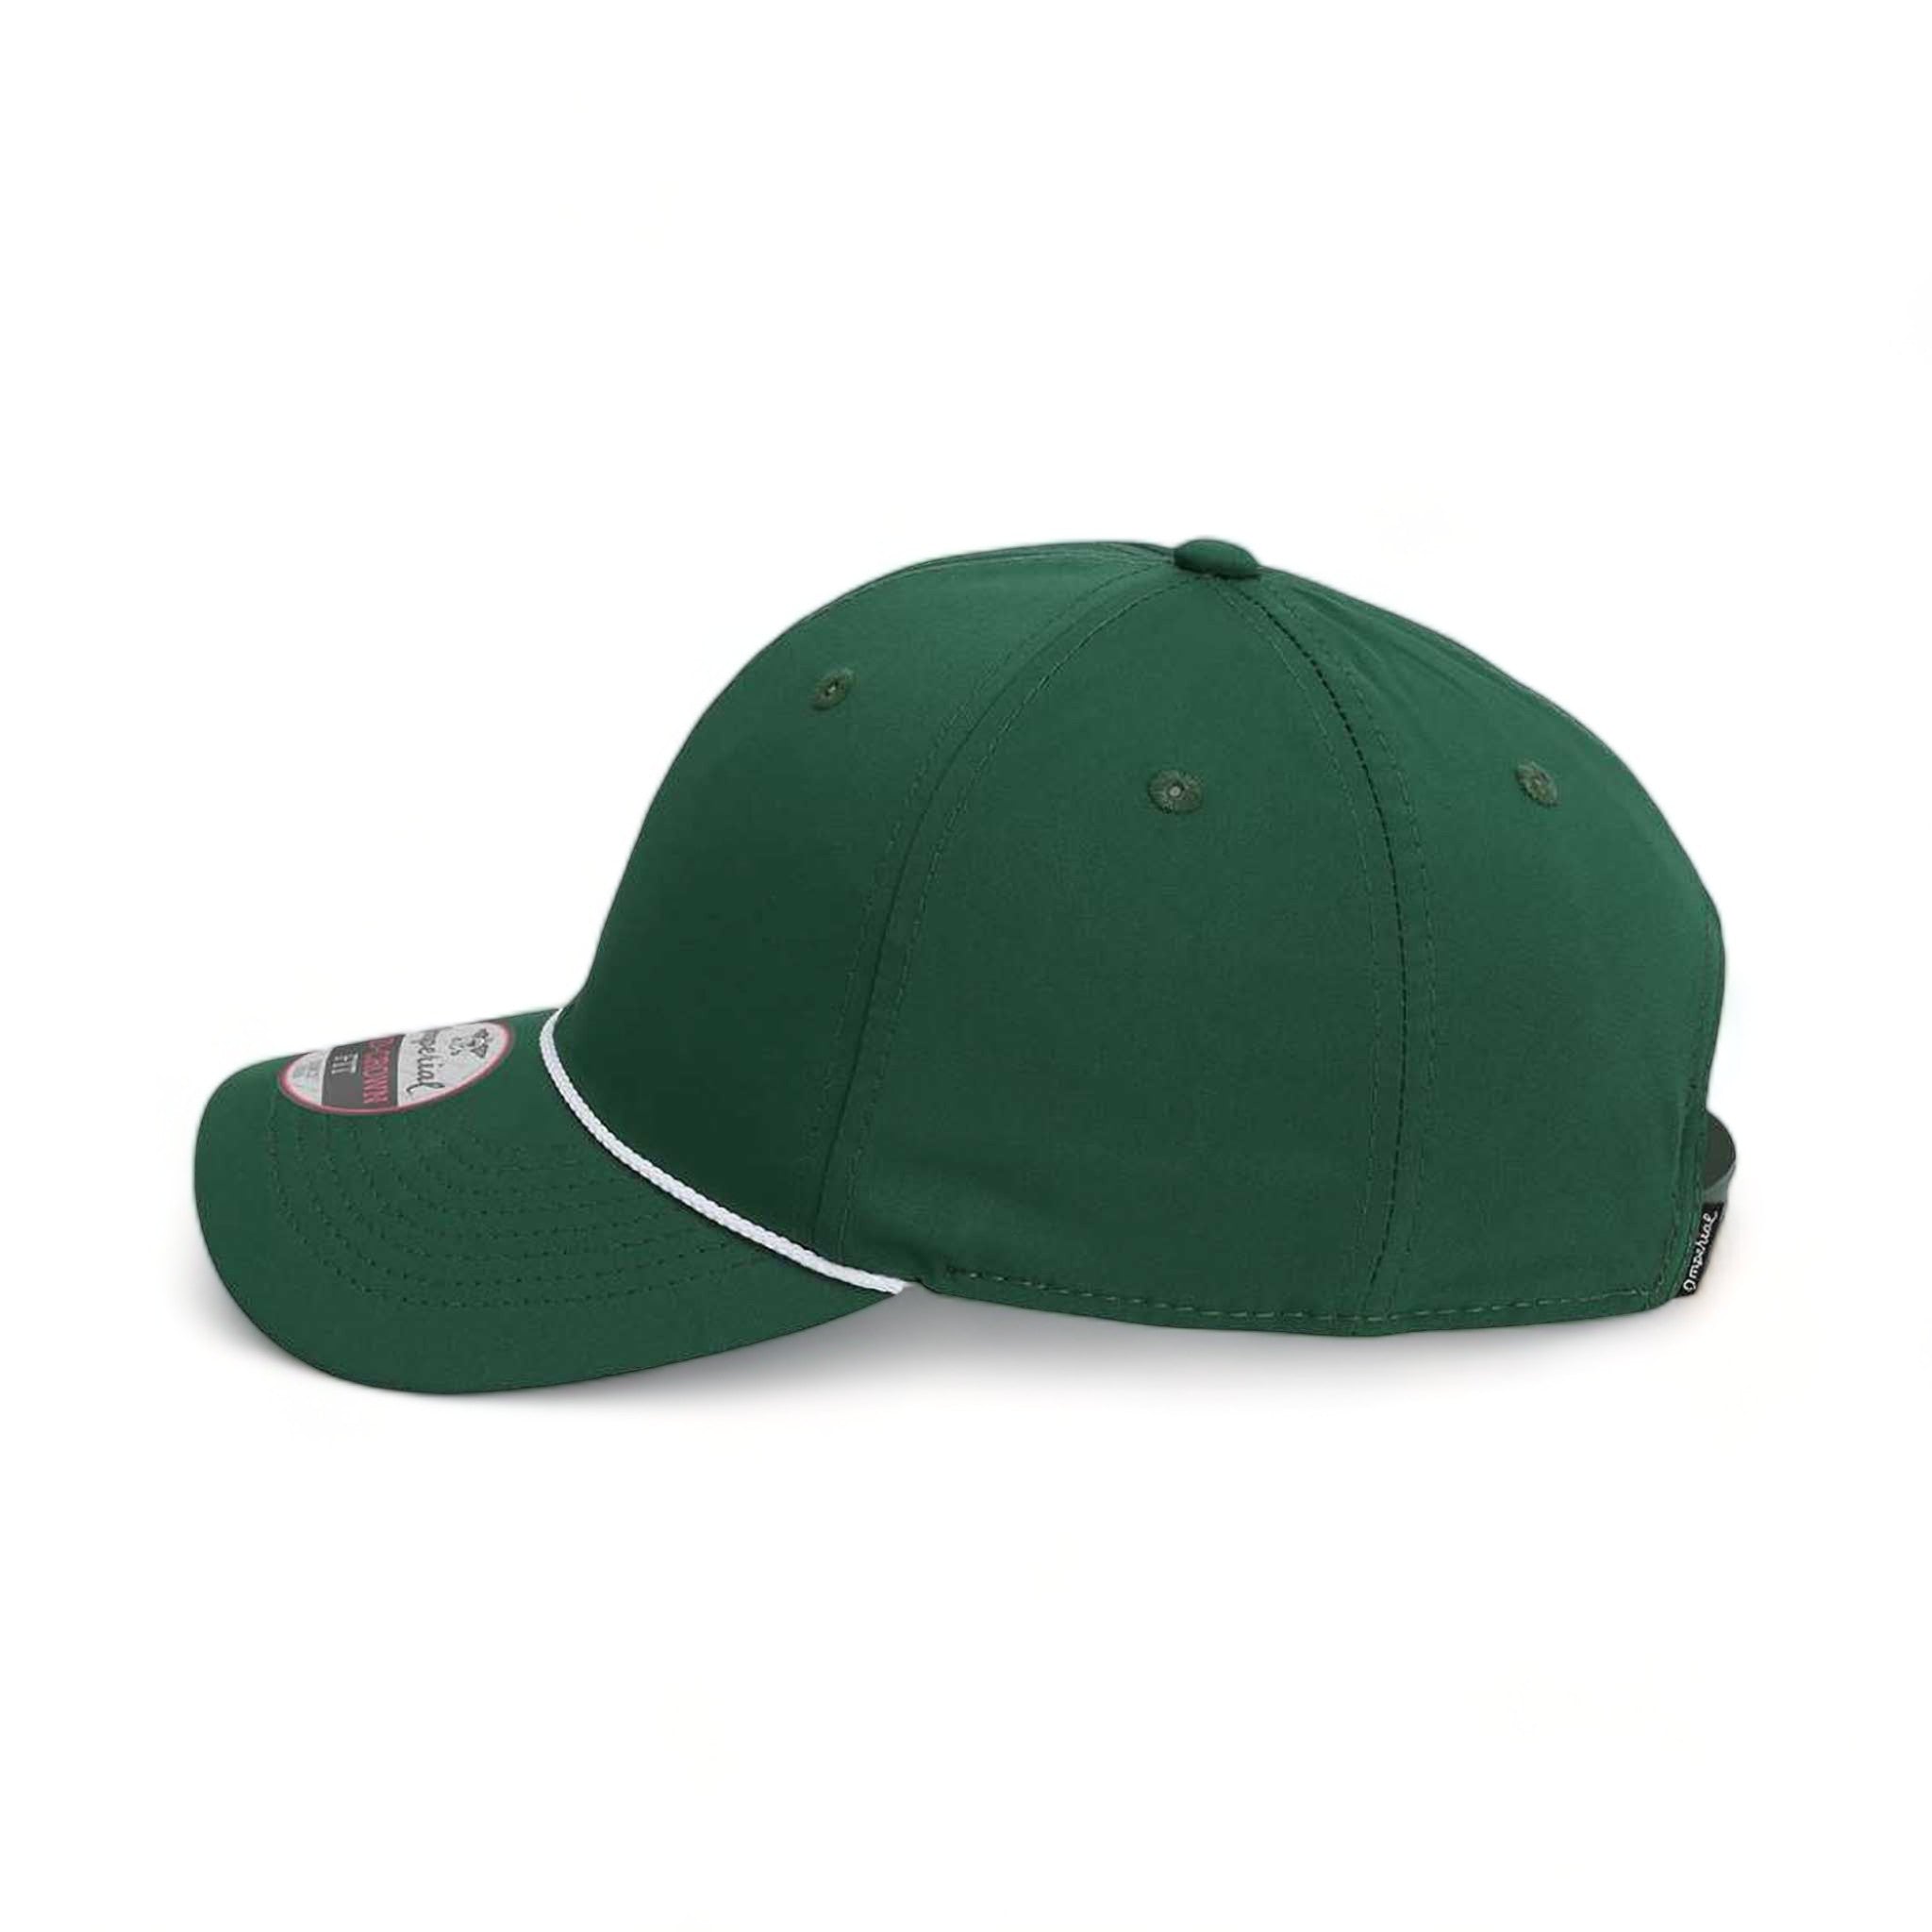 Side view of Imperial 7054 custom hat in forest and white